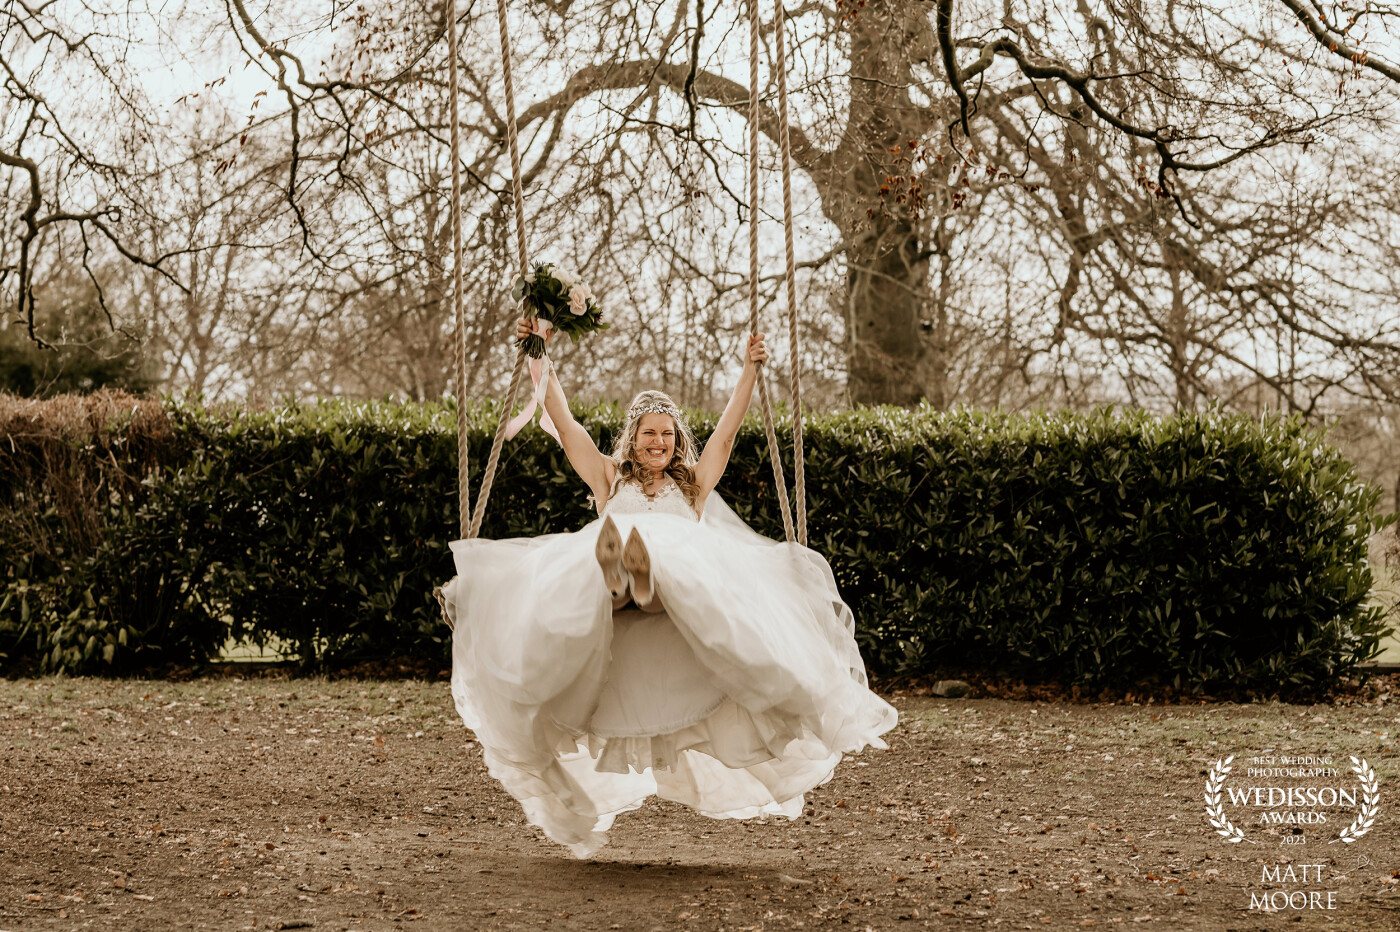 Selina enjoying a moment on the love swing at Ringwood Hall in Chesterfield during her wedding day... A true beaut!!